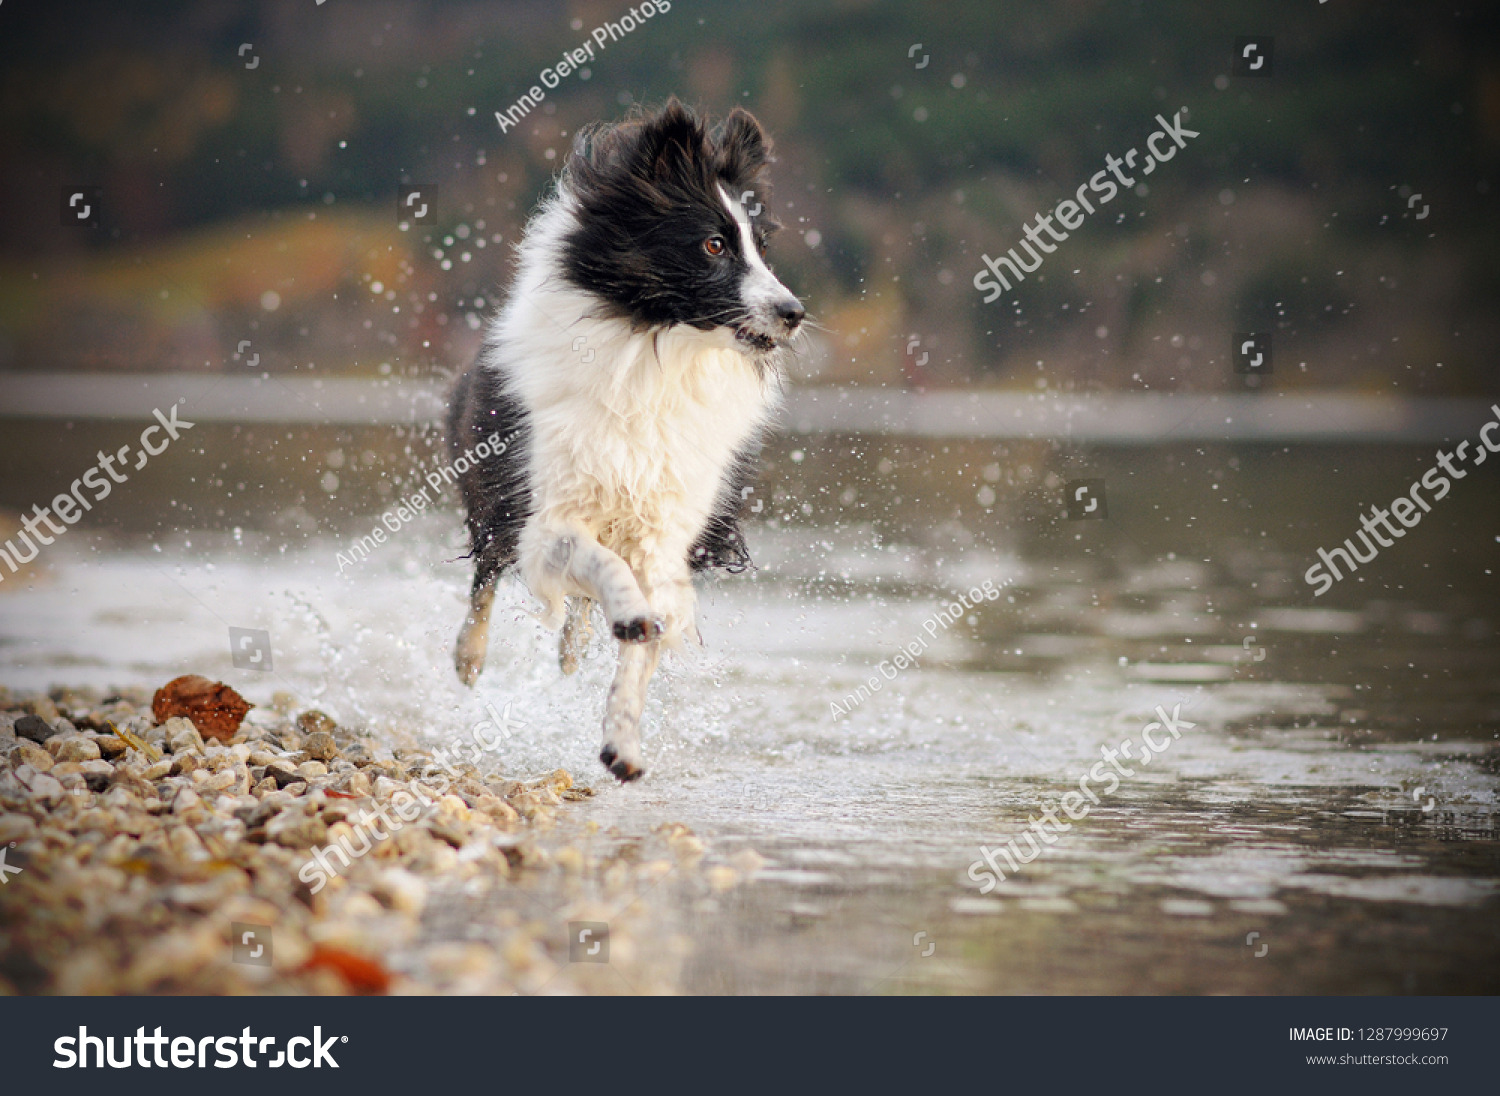 sheepdog in action